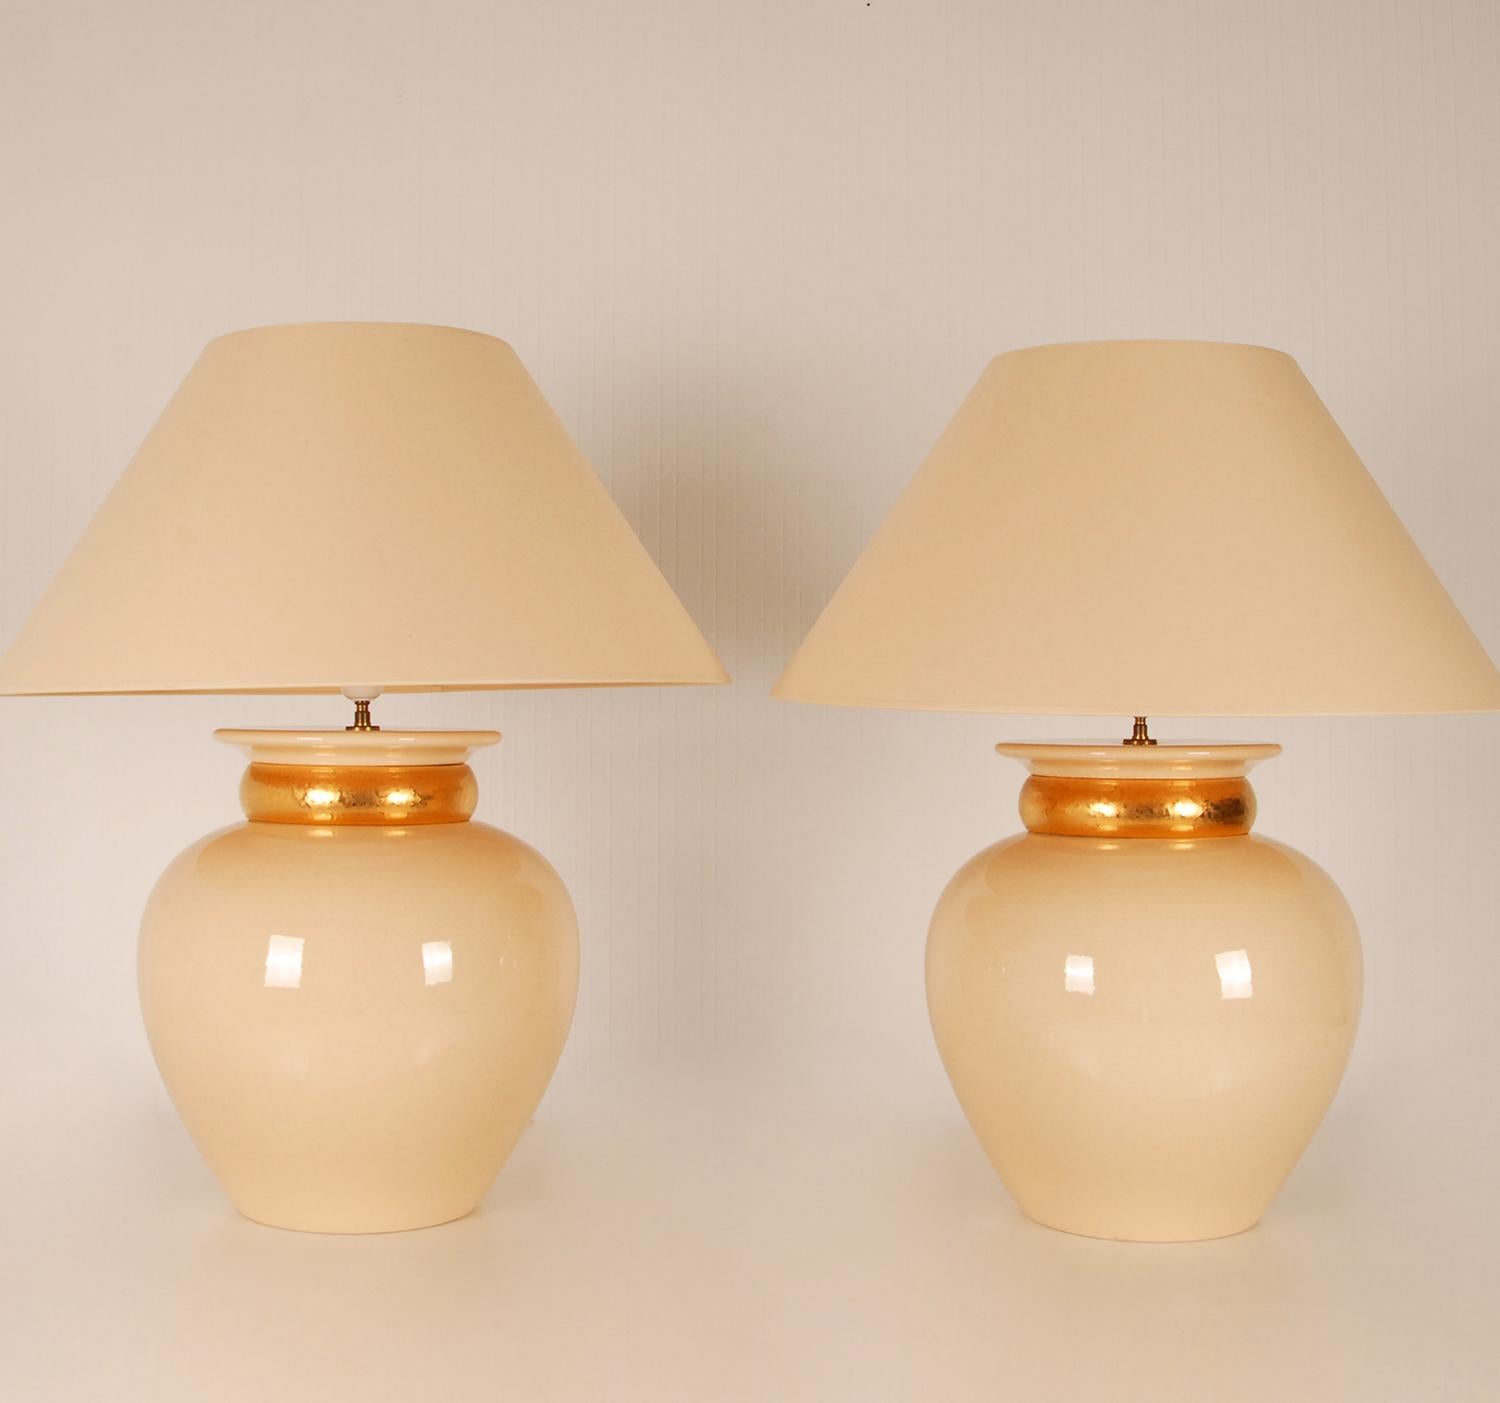 Vintage French Ceramic Robert Kostka Table Lamps Gold and Beige  - a Pair For Sale 1